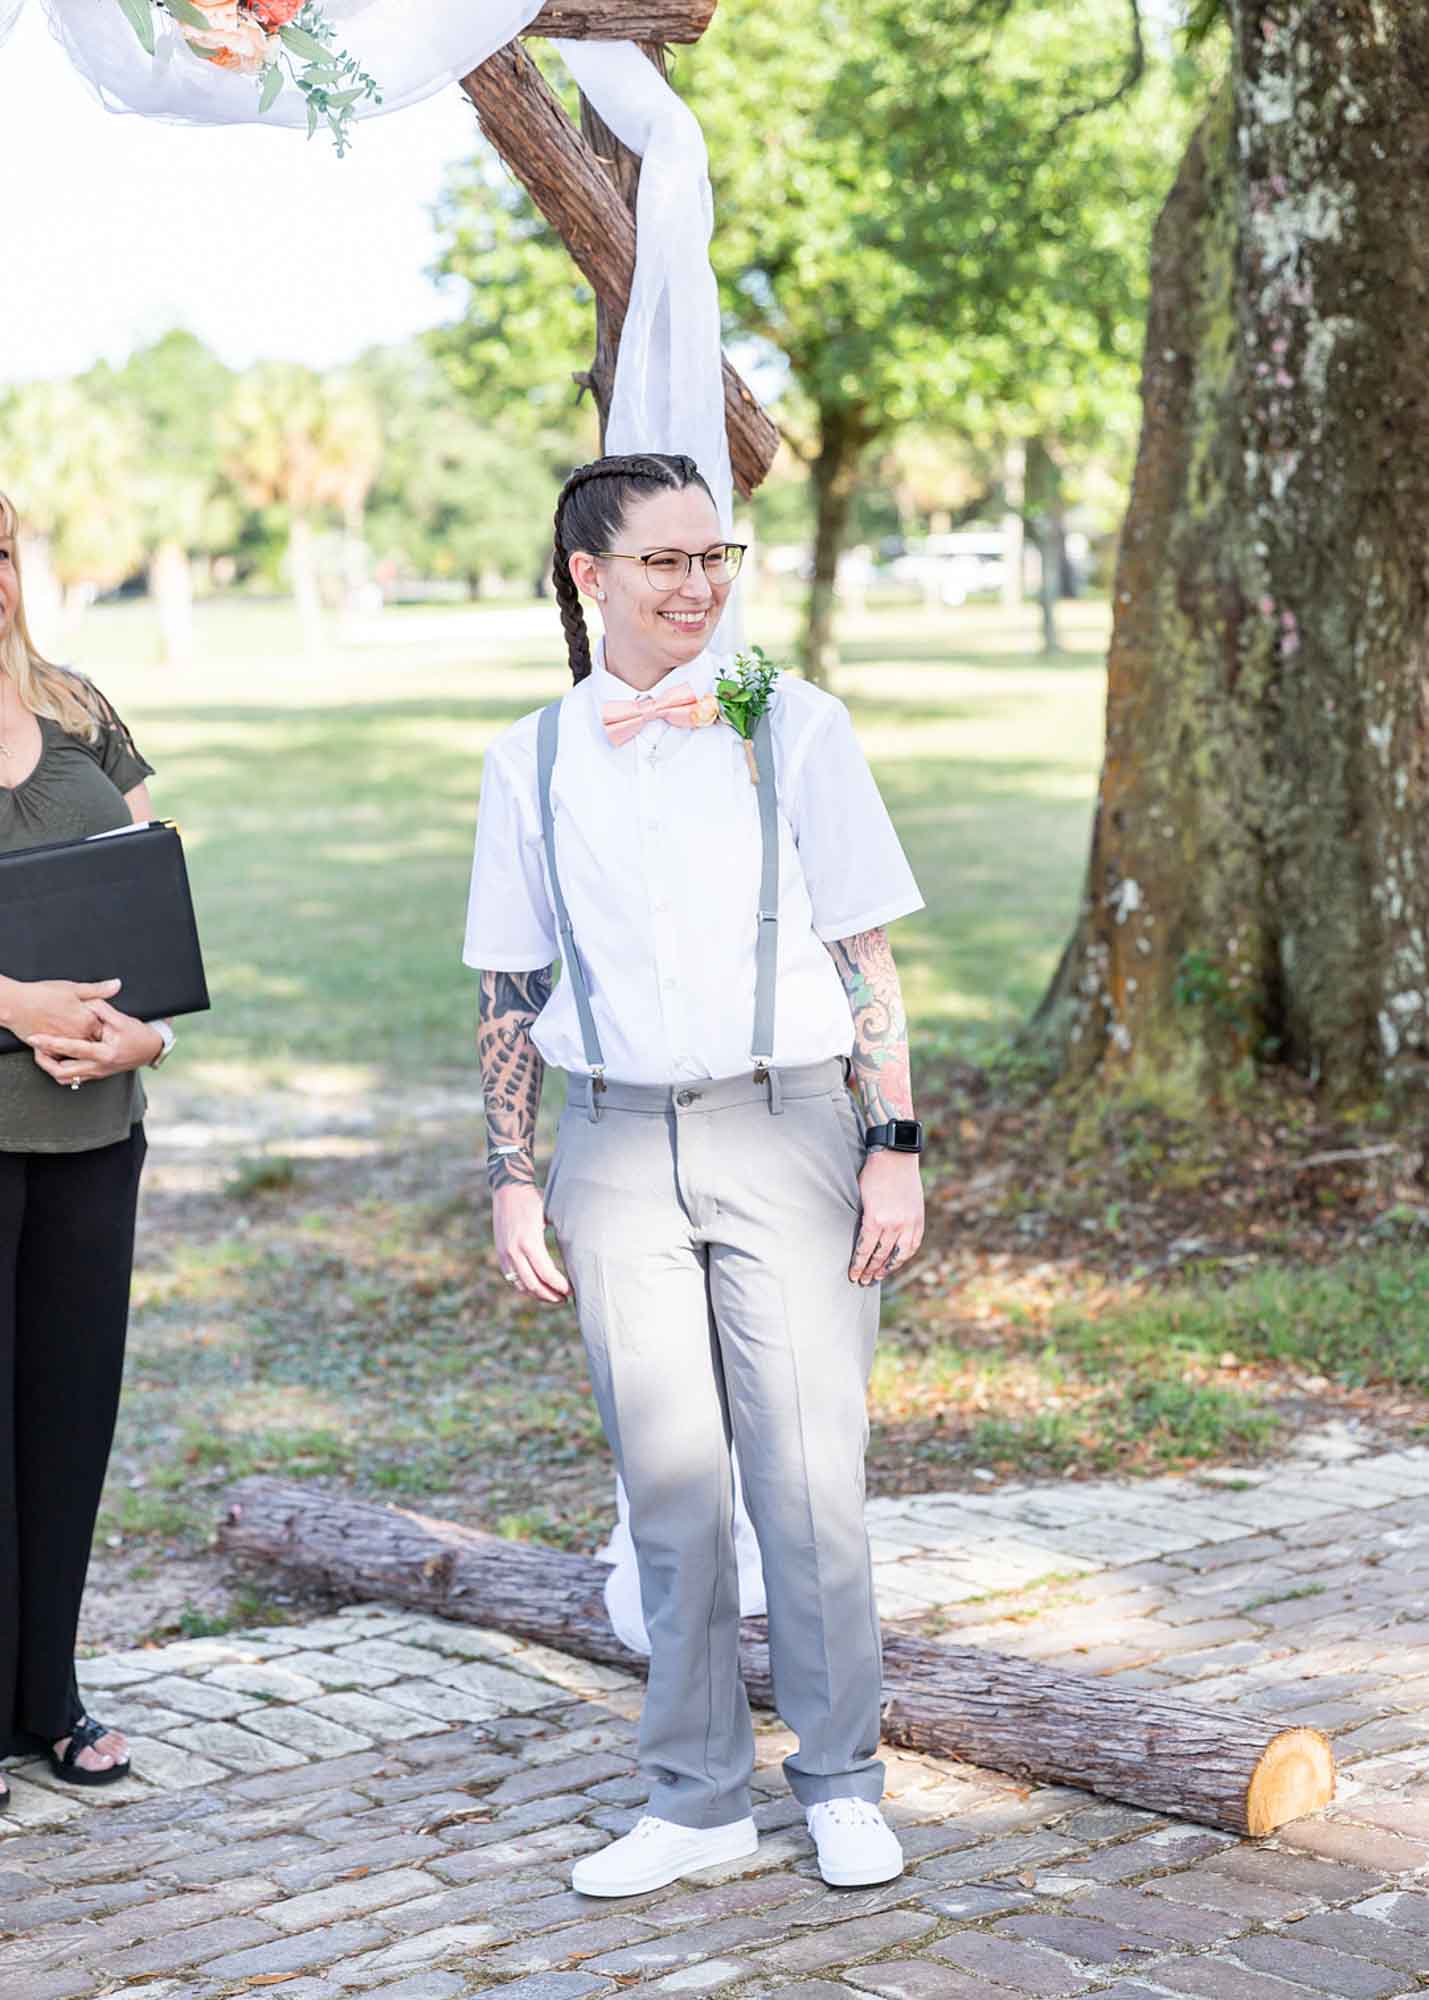 Florida gold club wedding with wooden arch and log cake | Joshua & Inez Photography | Featured on Equally Wed, the leading LGBTQ+ wedding magazine